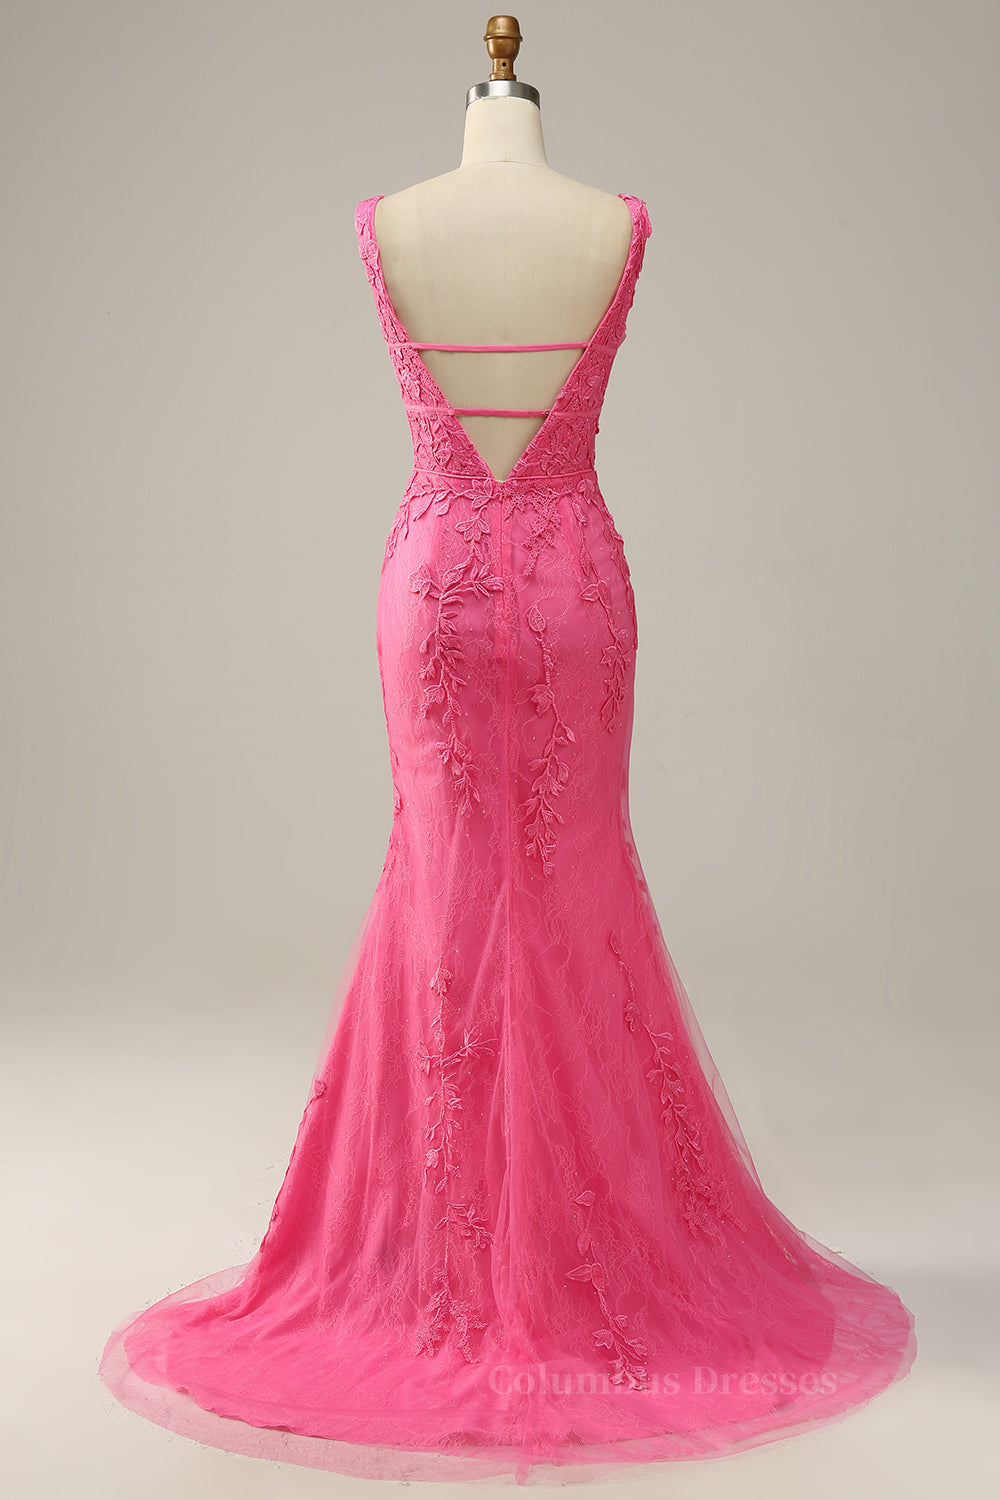 Bridesmaid Dresses Mismatched Fall, Hot Pink Appliques Plunging V Neck Mermaid Long Prom Dress